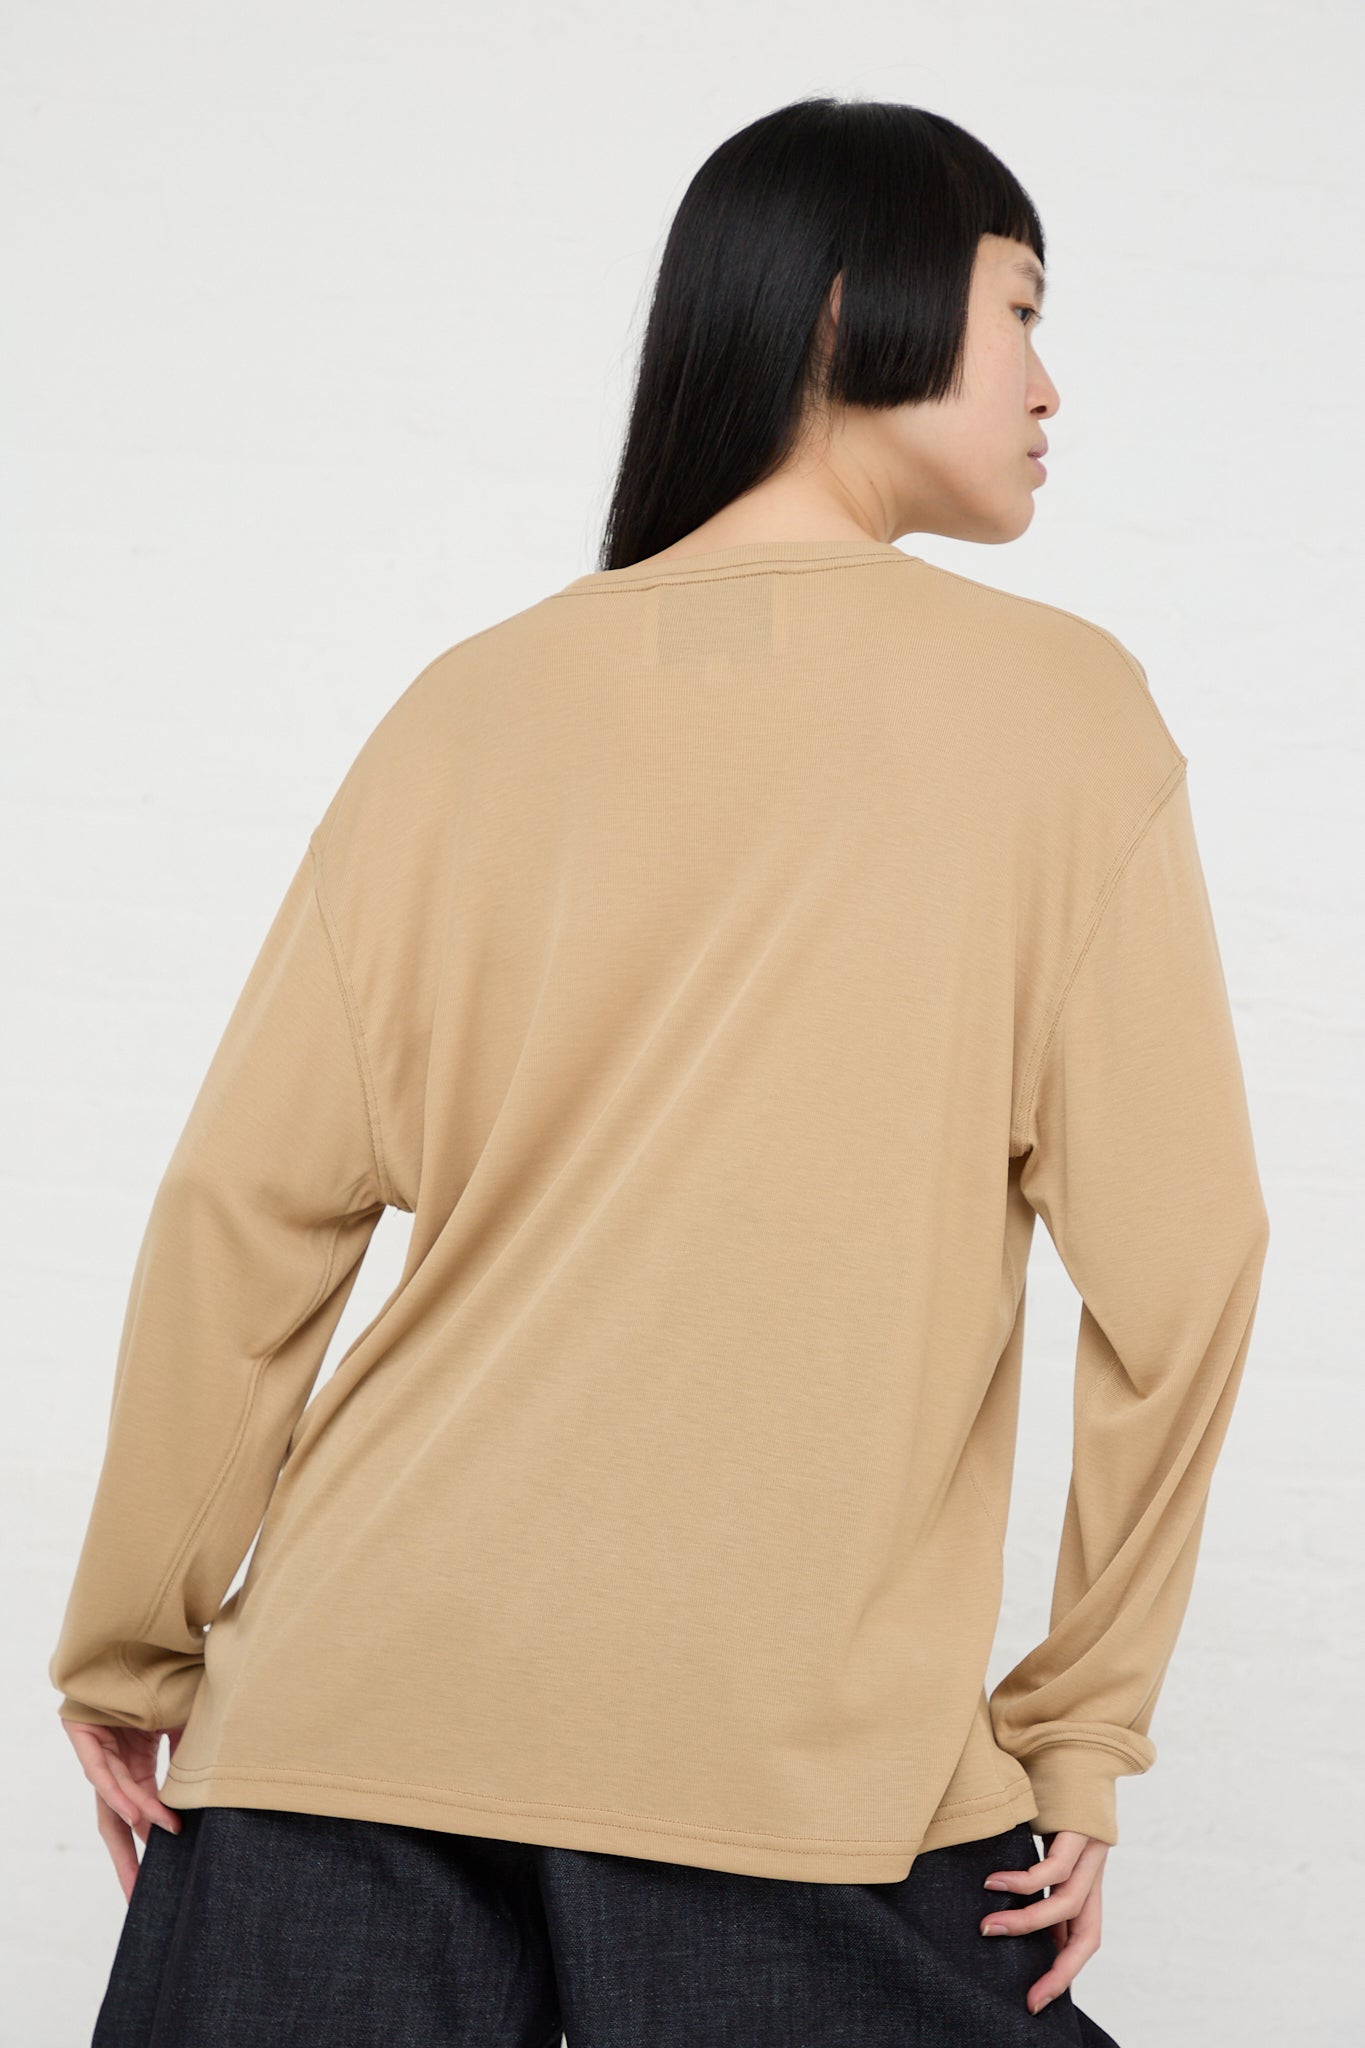 The back view of a woman wearing a Studio Nicholson Simmons Long Sleeve Top in Sand with dropped shoulders.